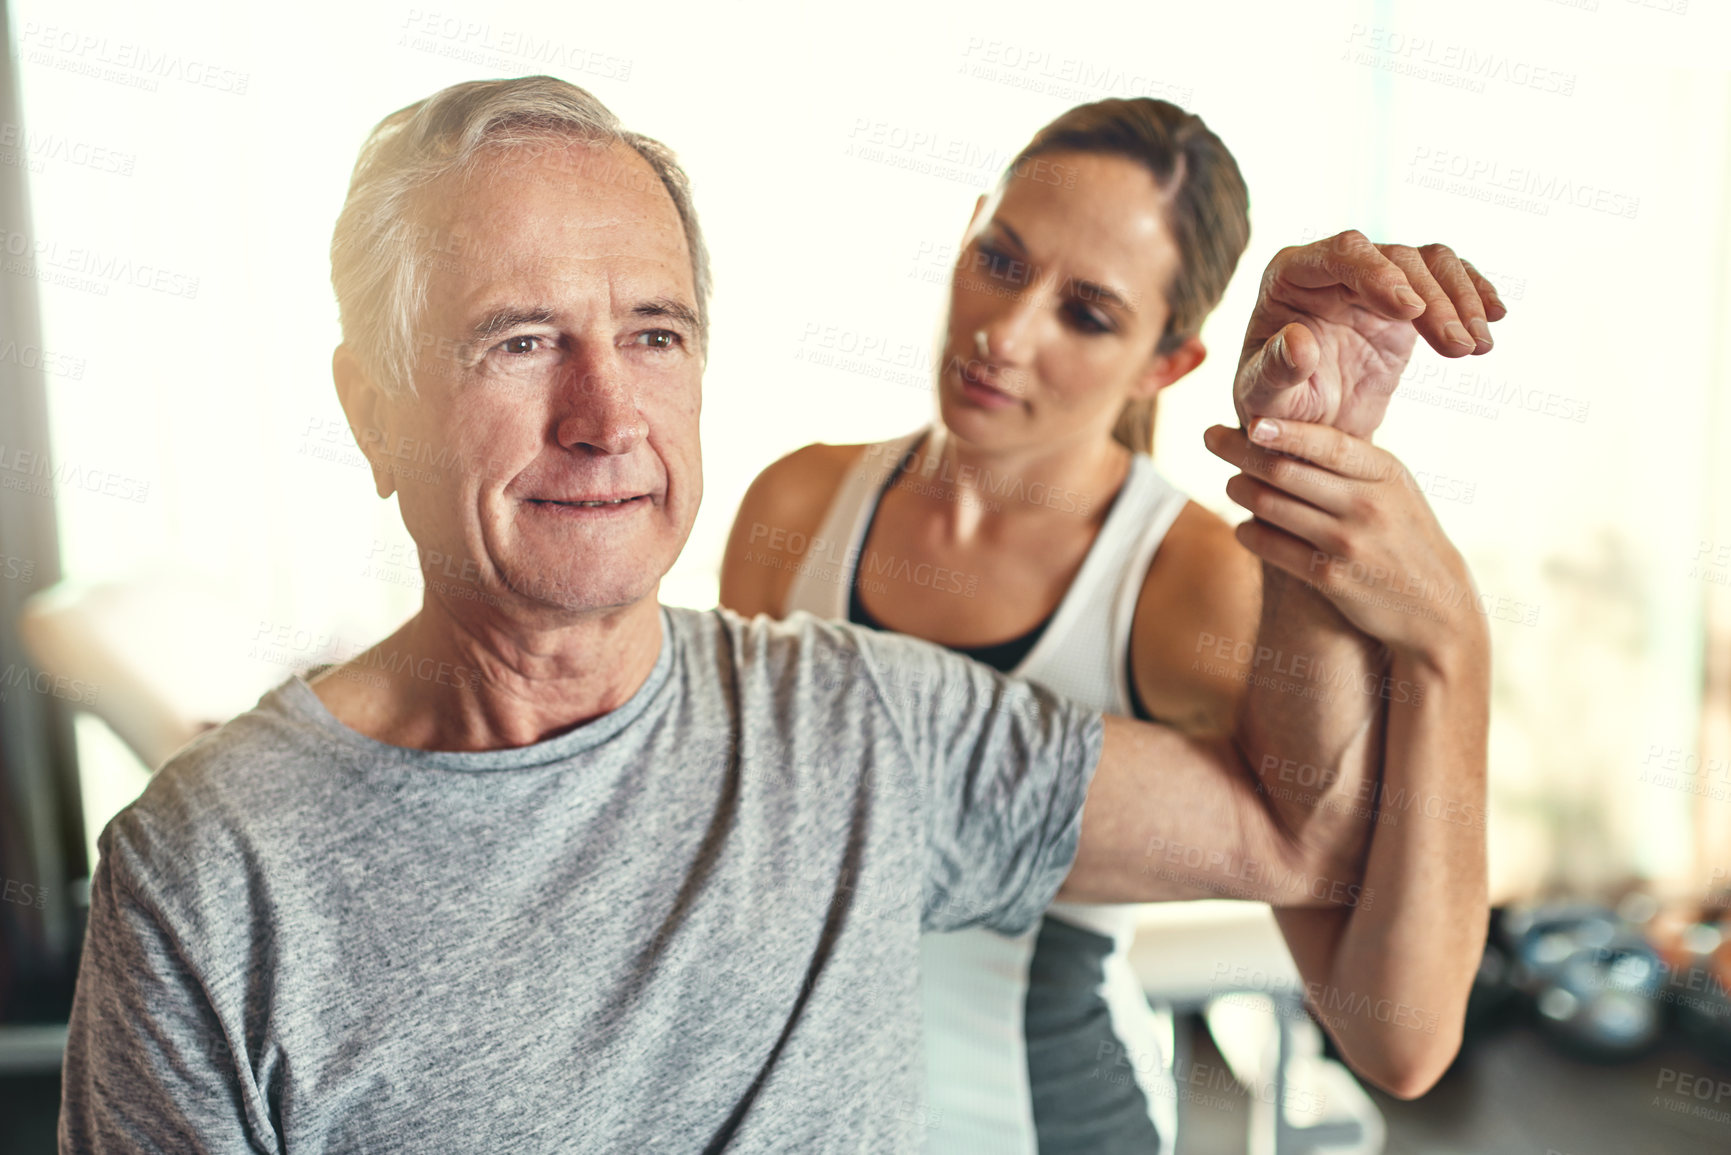 Buy stock photo Old man, physiotherapist and arm rehabilitation treatment or mobility exercise or flexibility, training or assessment. Patient, woman and healing therapy or injury results for muscle, wellness or job